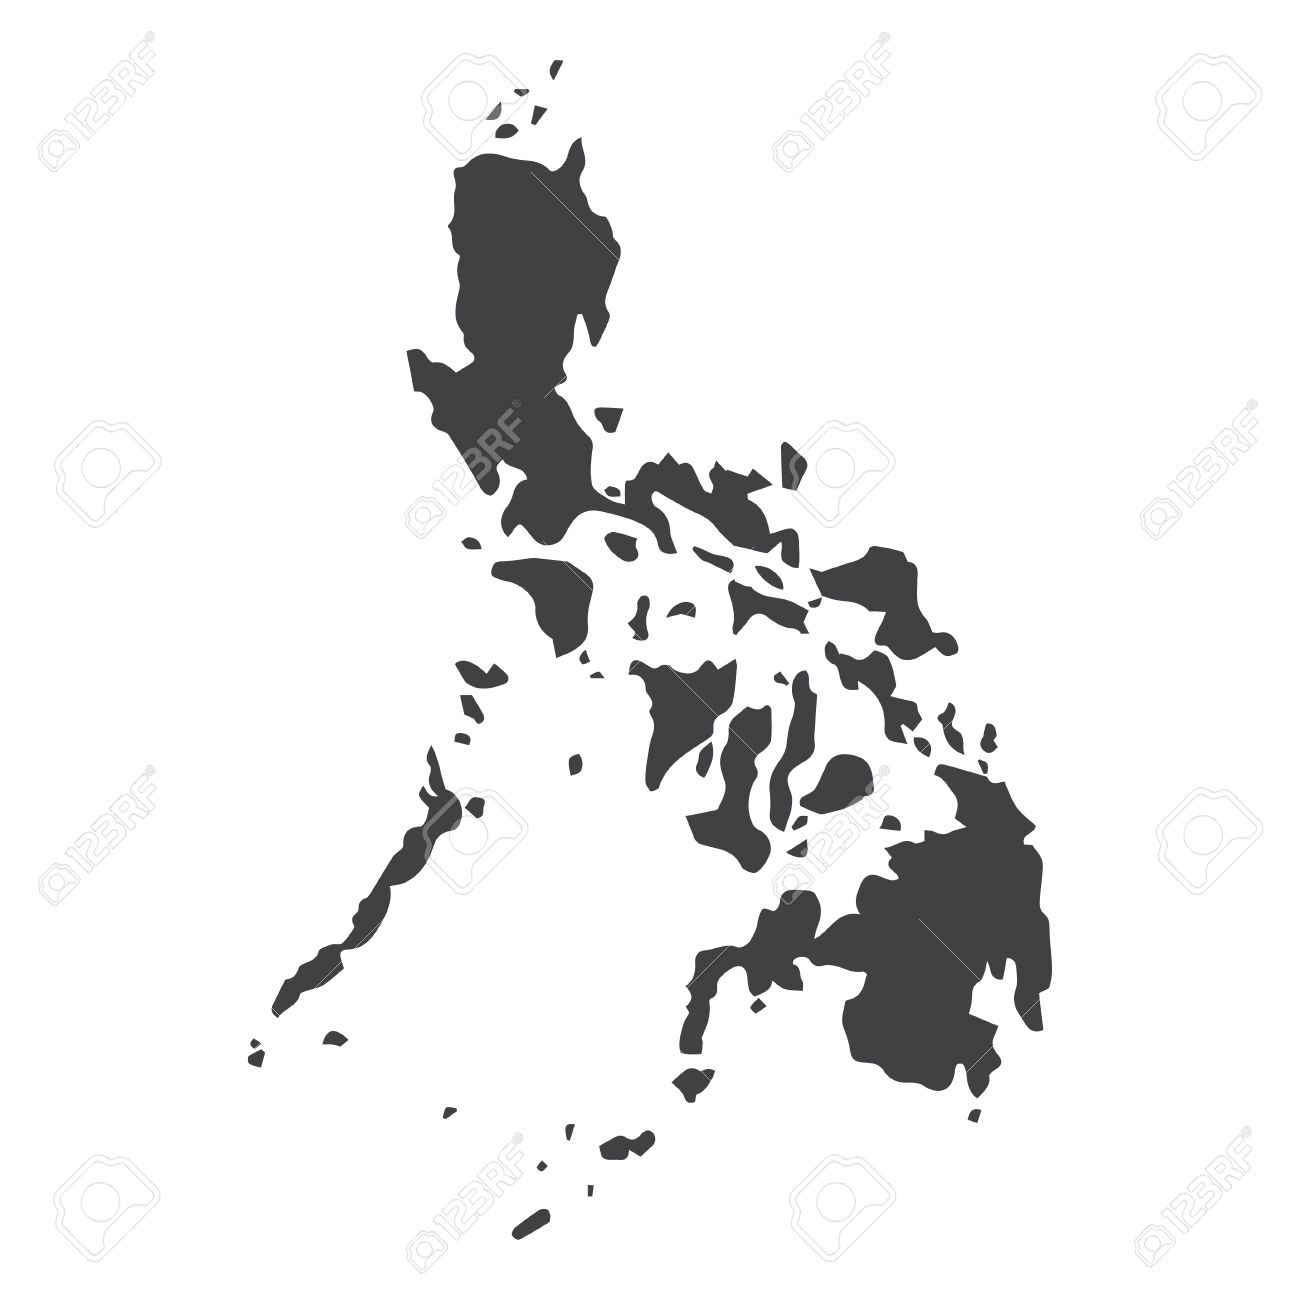 Philippines map in black on a white background